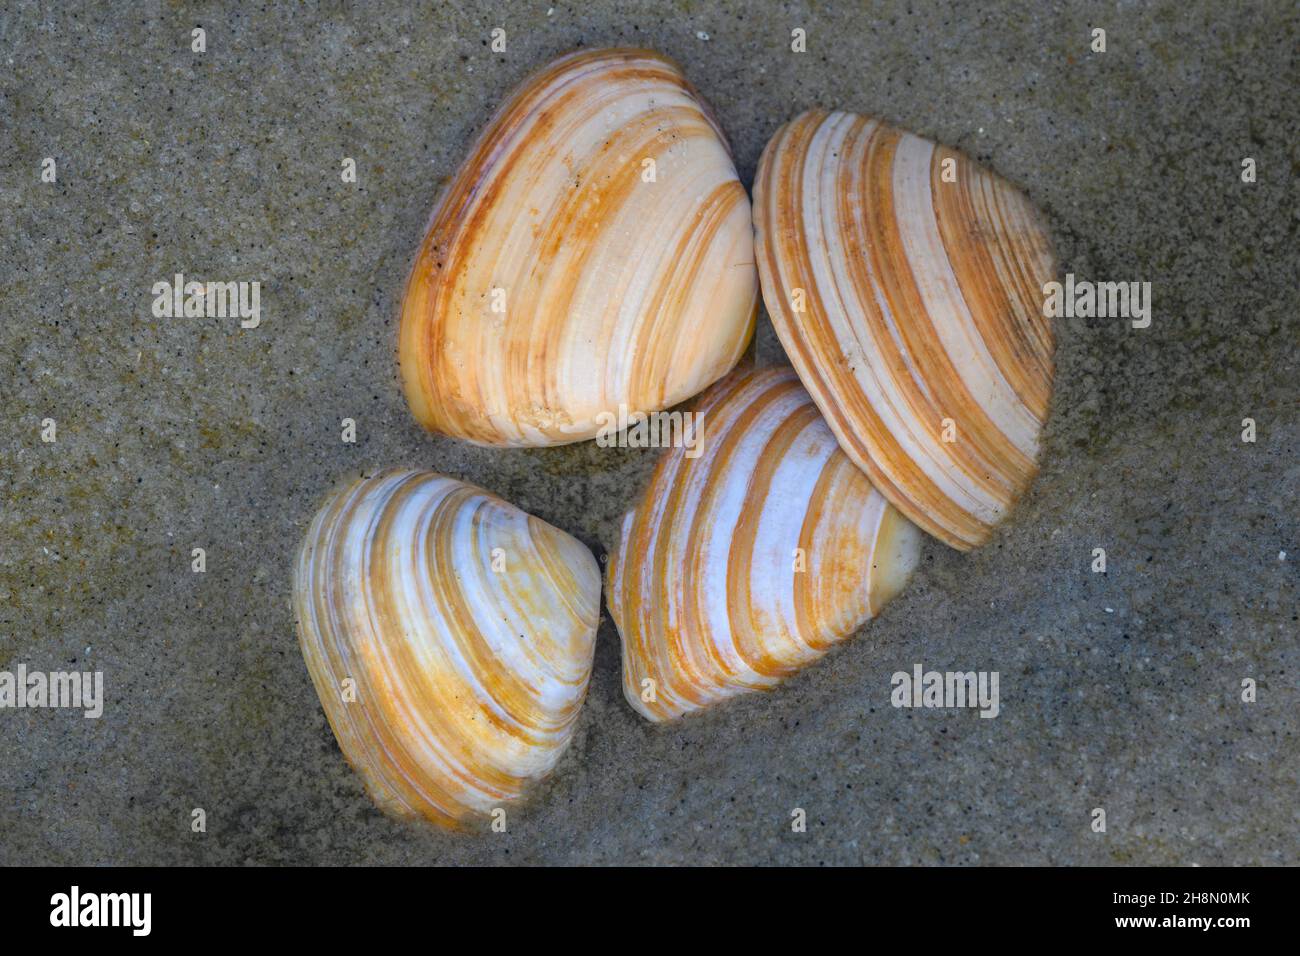 Baltic macoma (Limecola balthica) on the beach of the North Sea, island, Spiekeroog, Lower Saxony, Germany Stock Photo